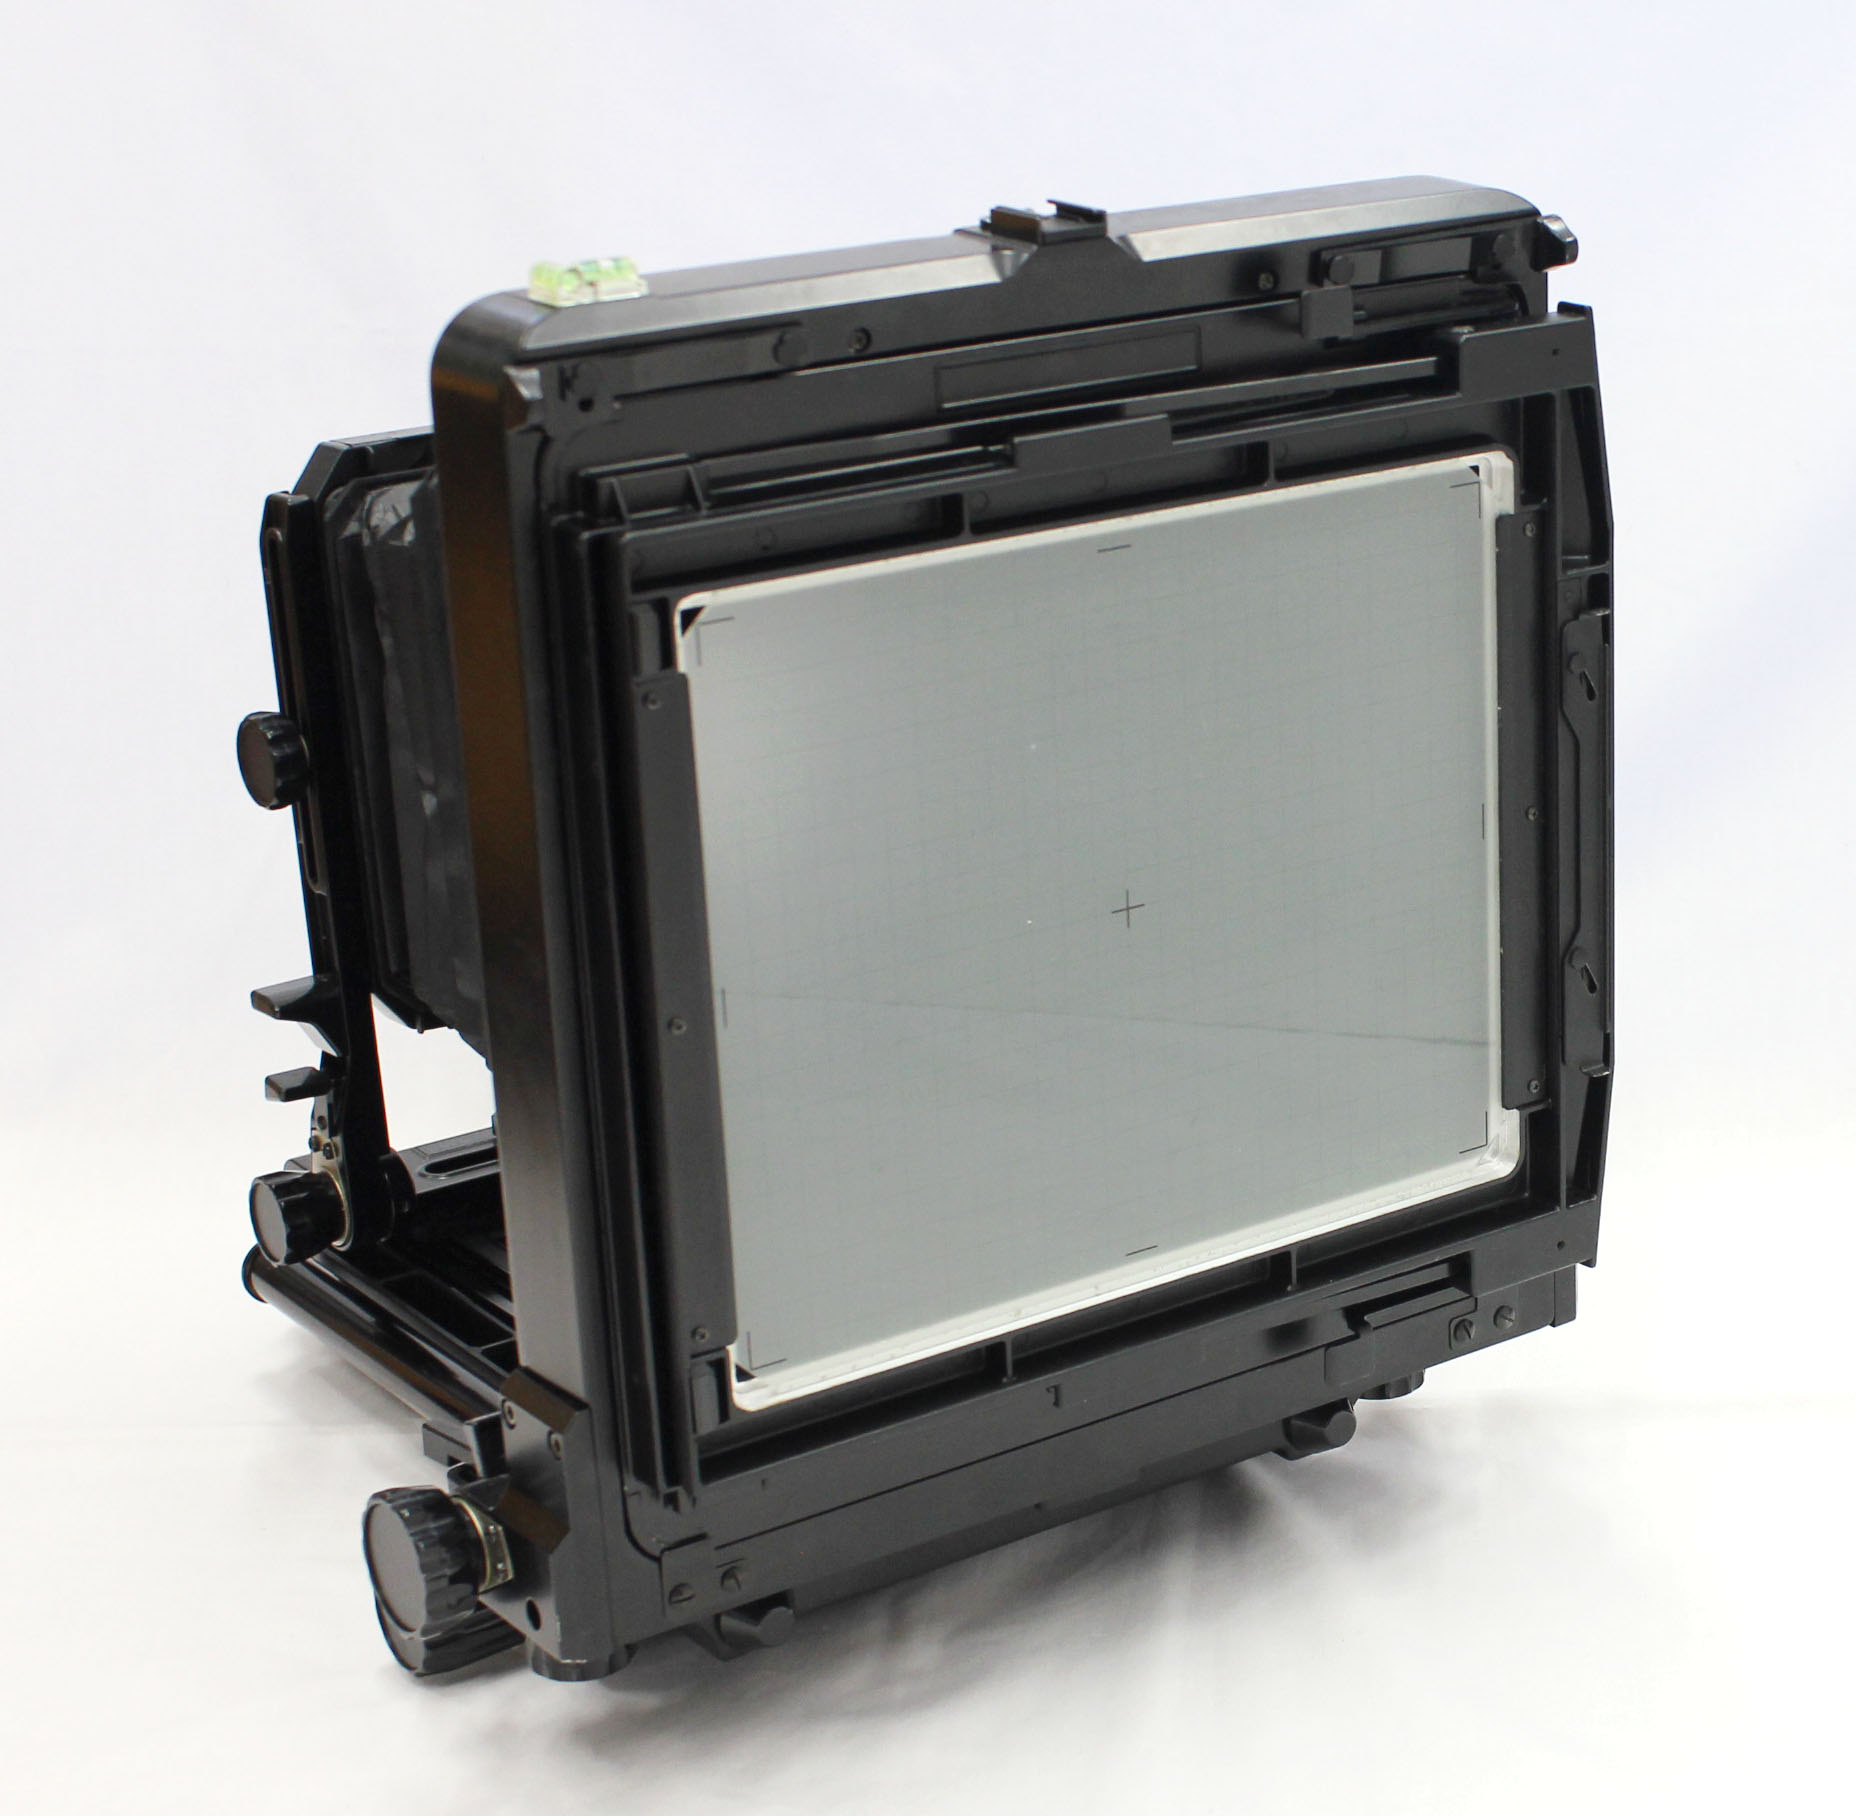 Toyo Field 810M II 8x10 Large Format Camera with Linhof Board Adapter in Toyo Case from Japan Photo 7